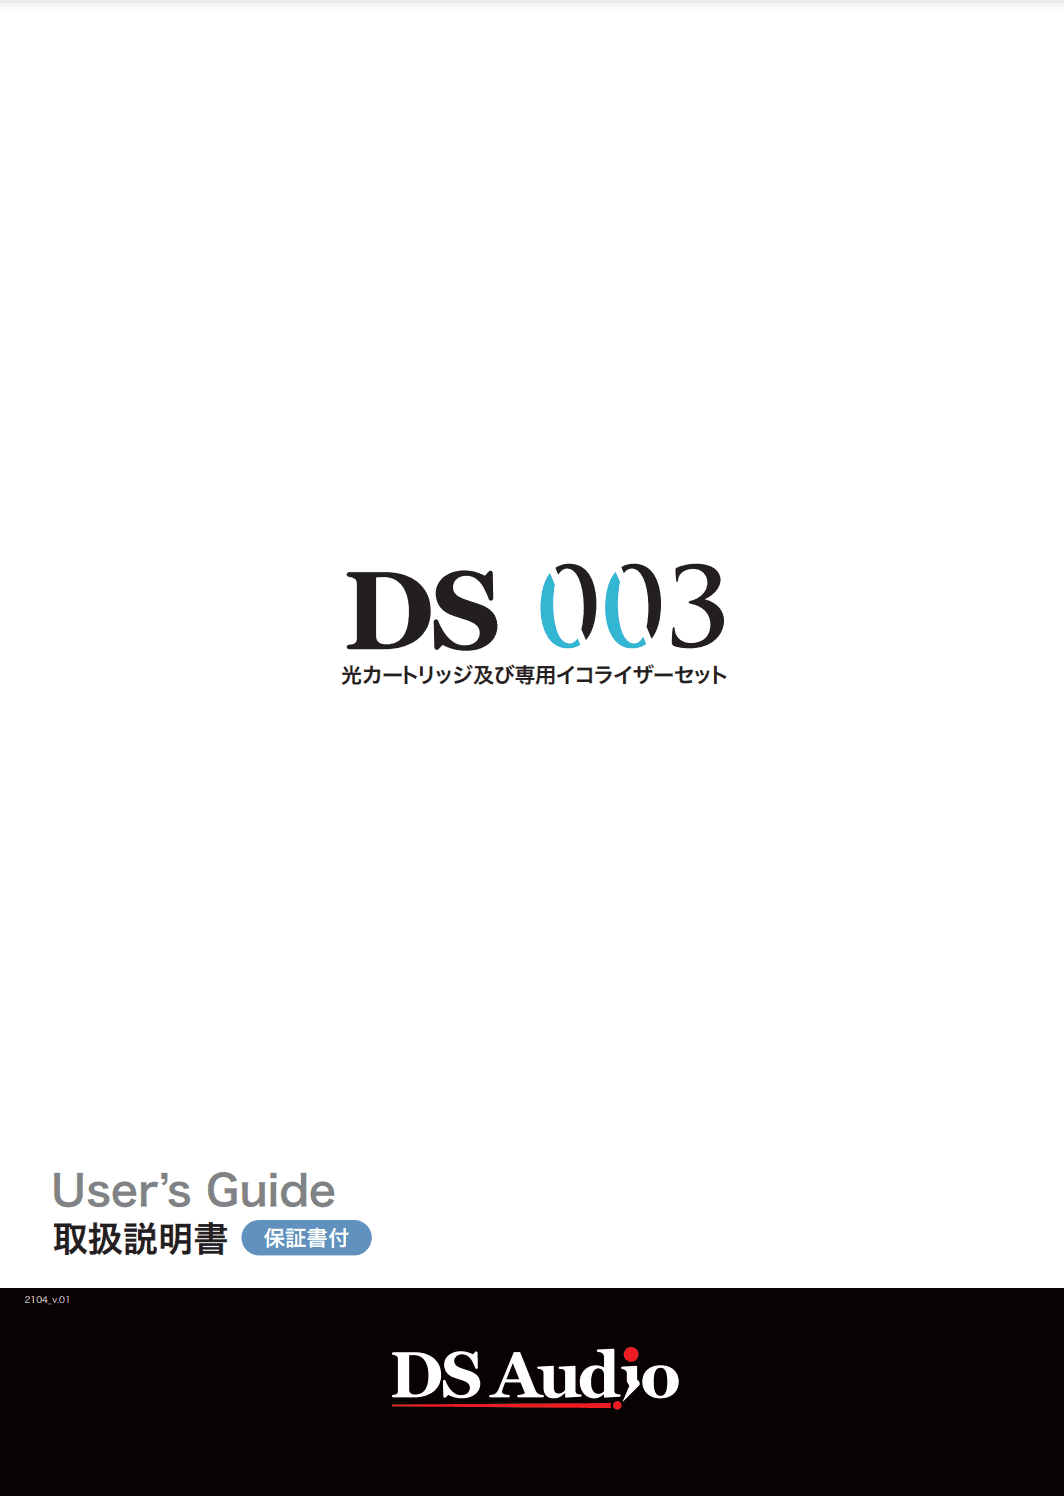 DS003 Instruction Manual